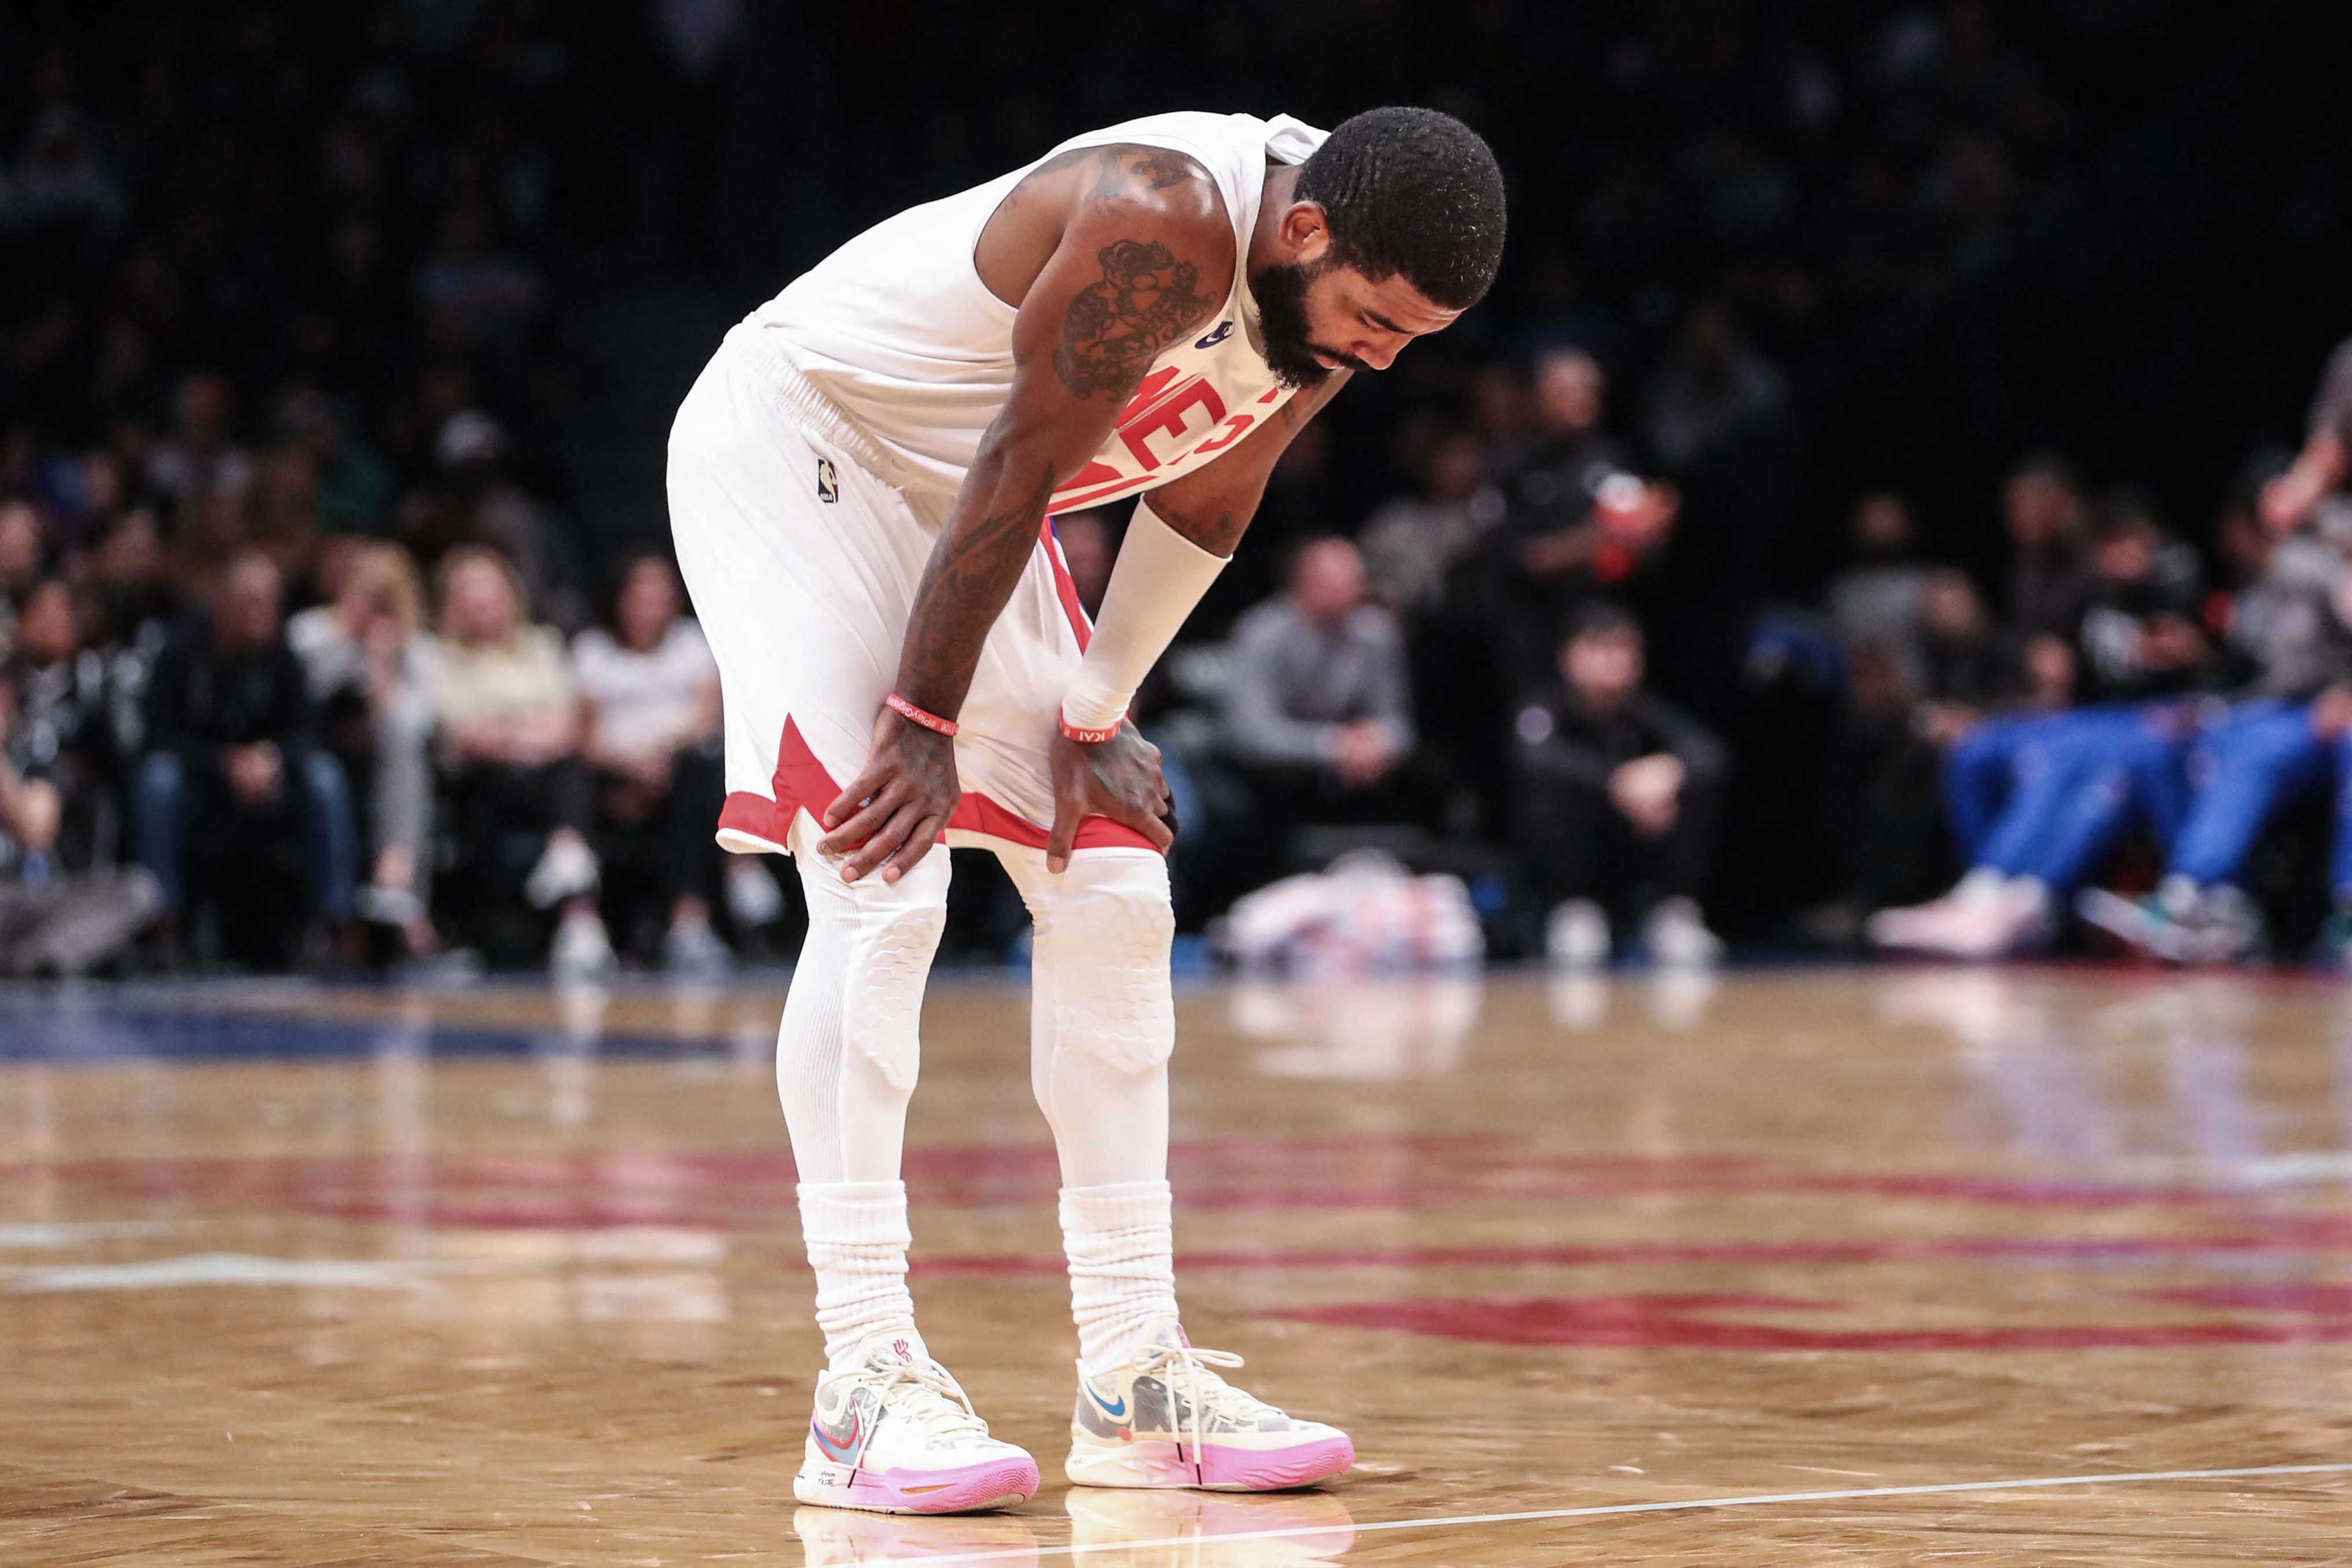 The base of the New York franchise finally apologized for being forgiven (Mandatory Credit: Wendell Cruz-USA TODAY Sports)